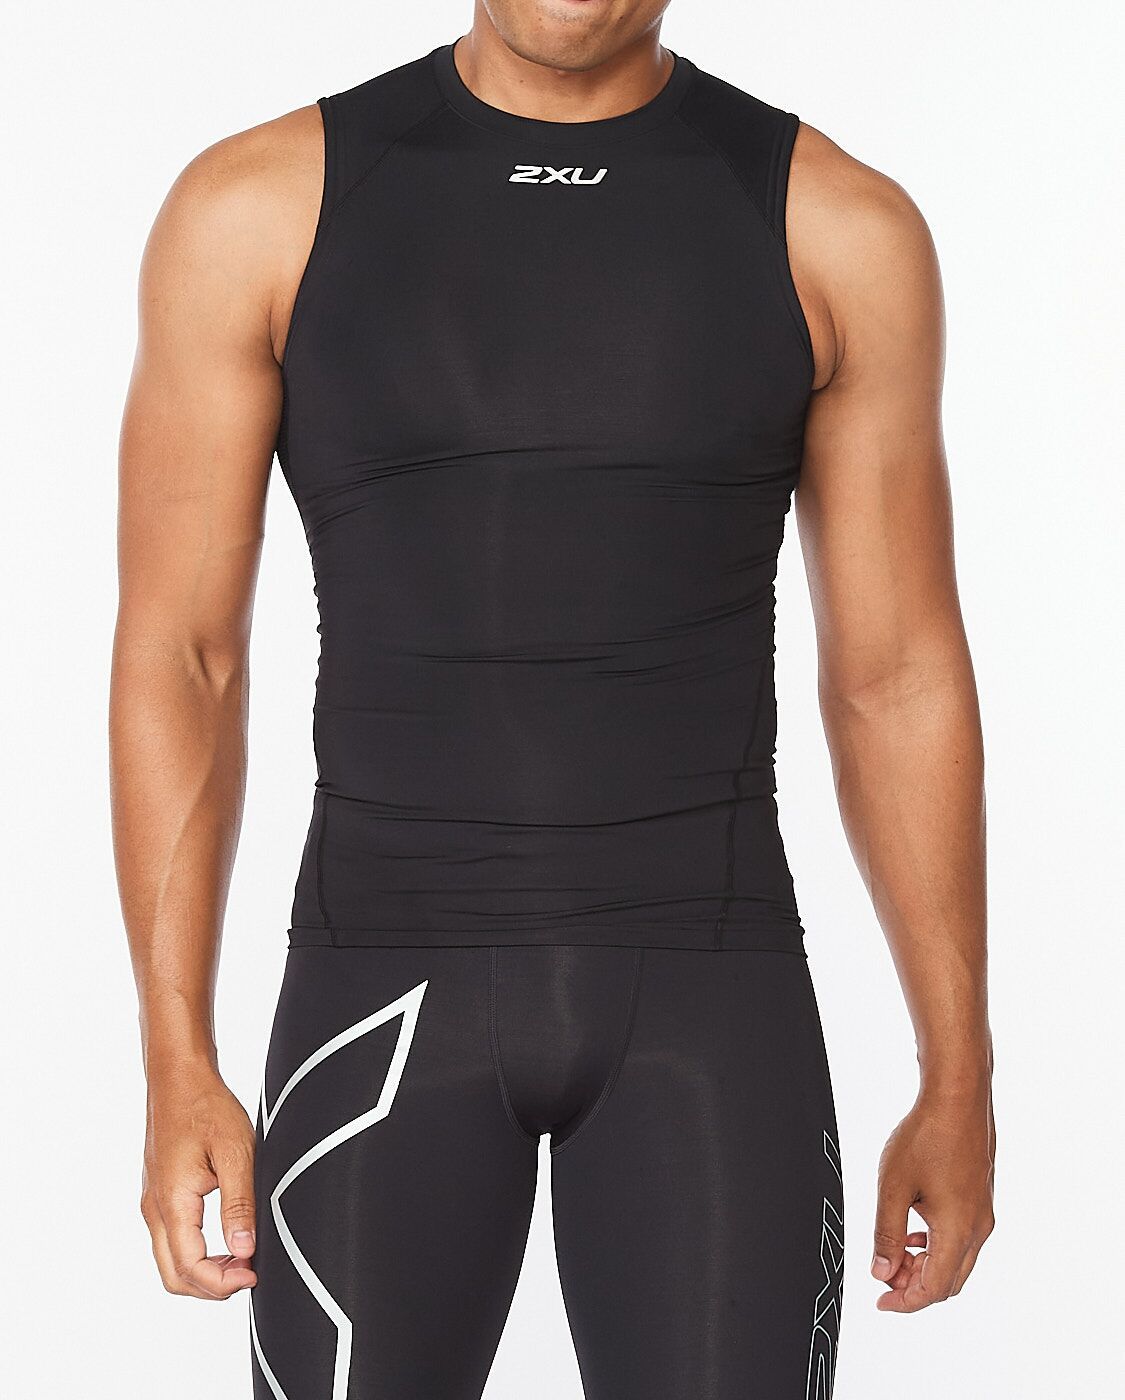 2XU South Africa - Men's Core Compression Sleeveless - Black/Silver